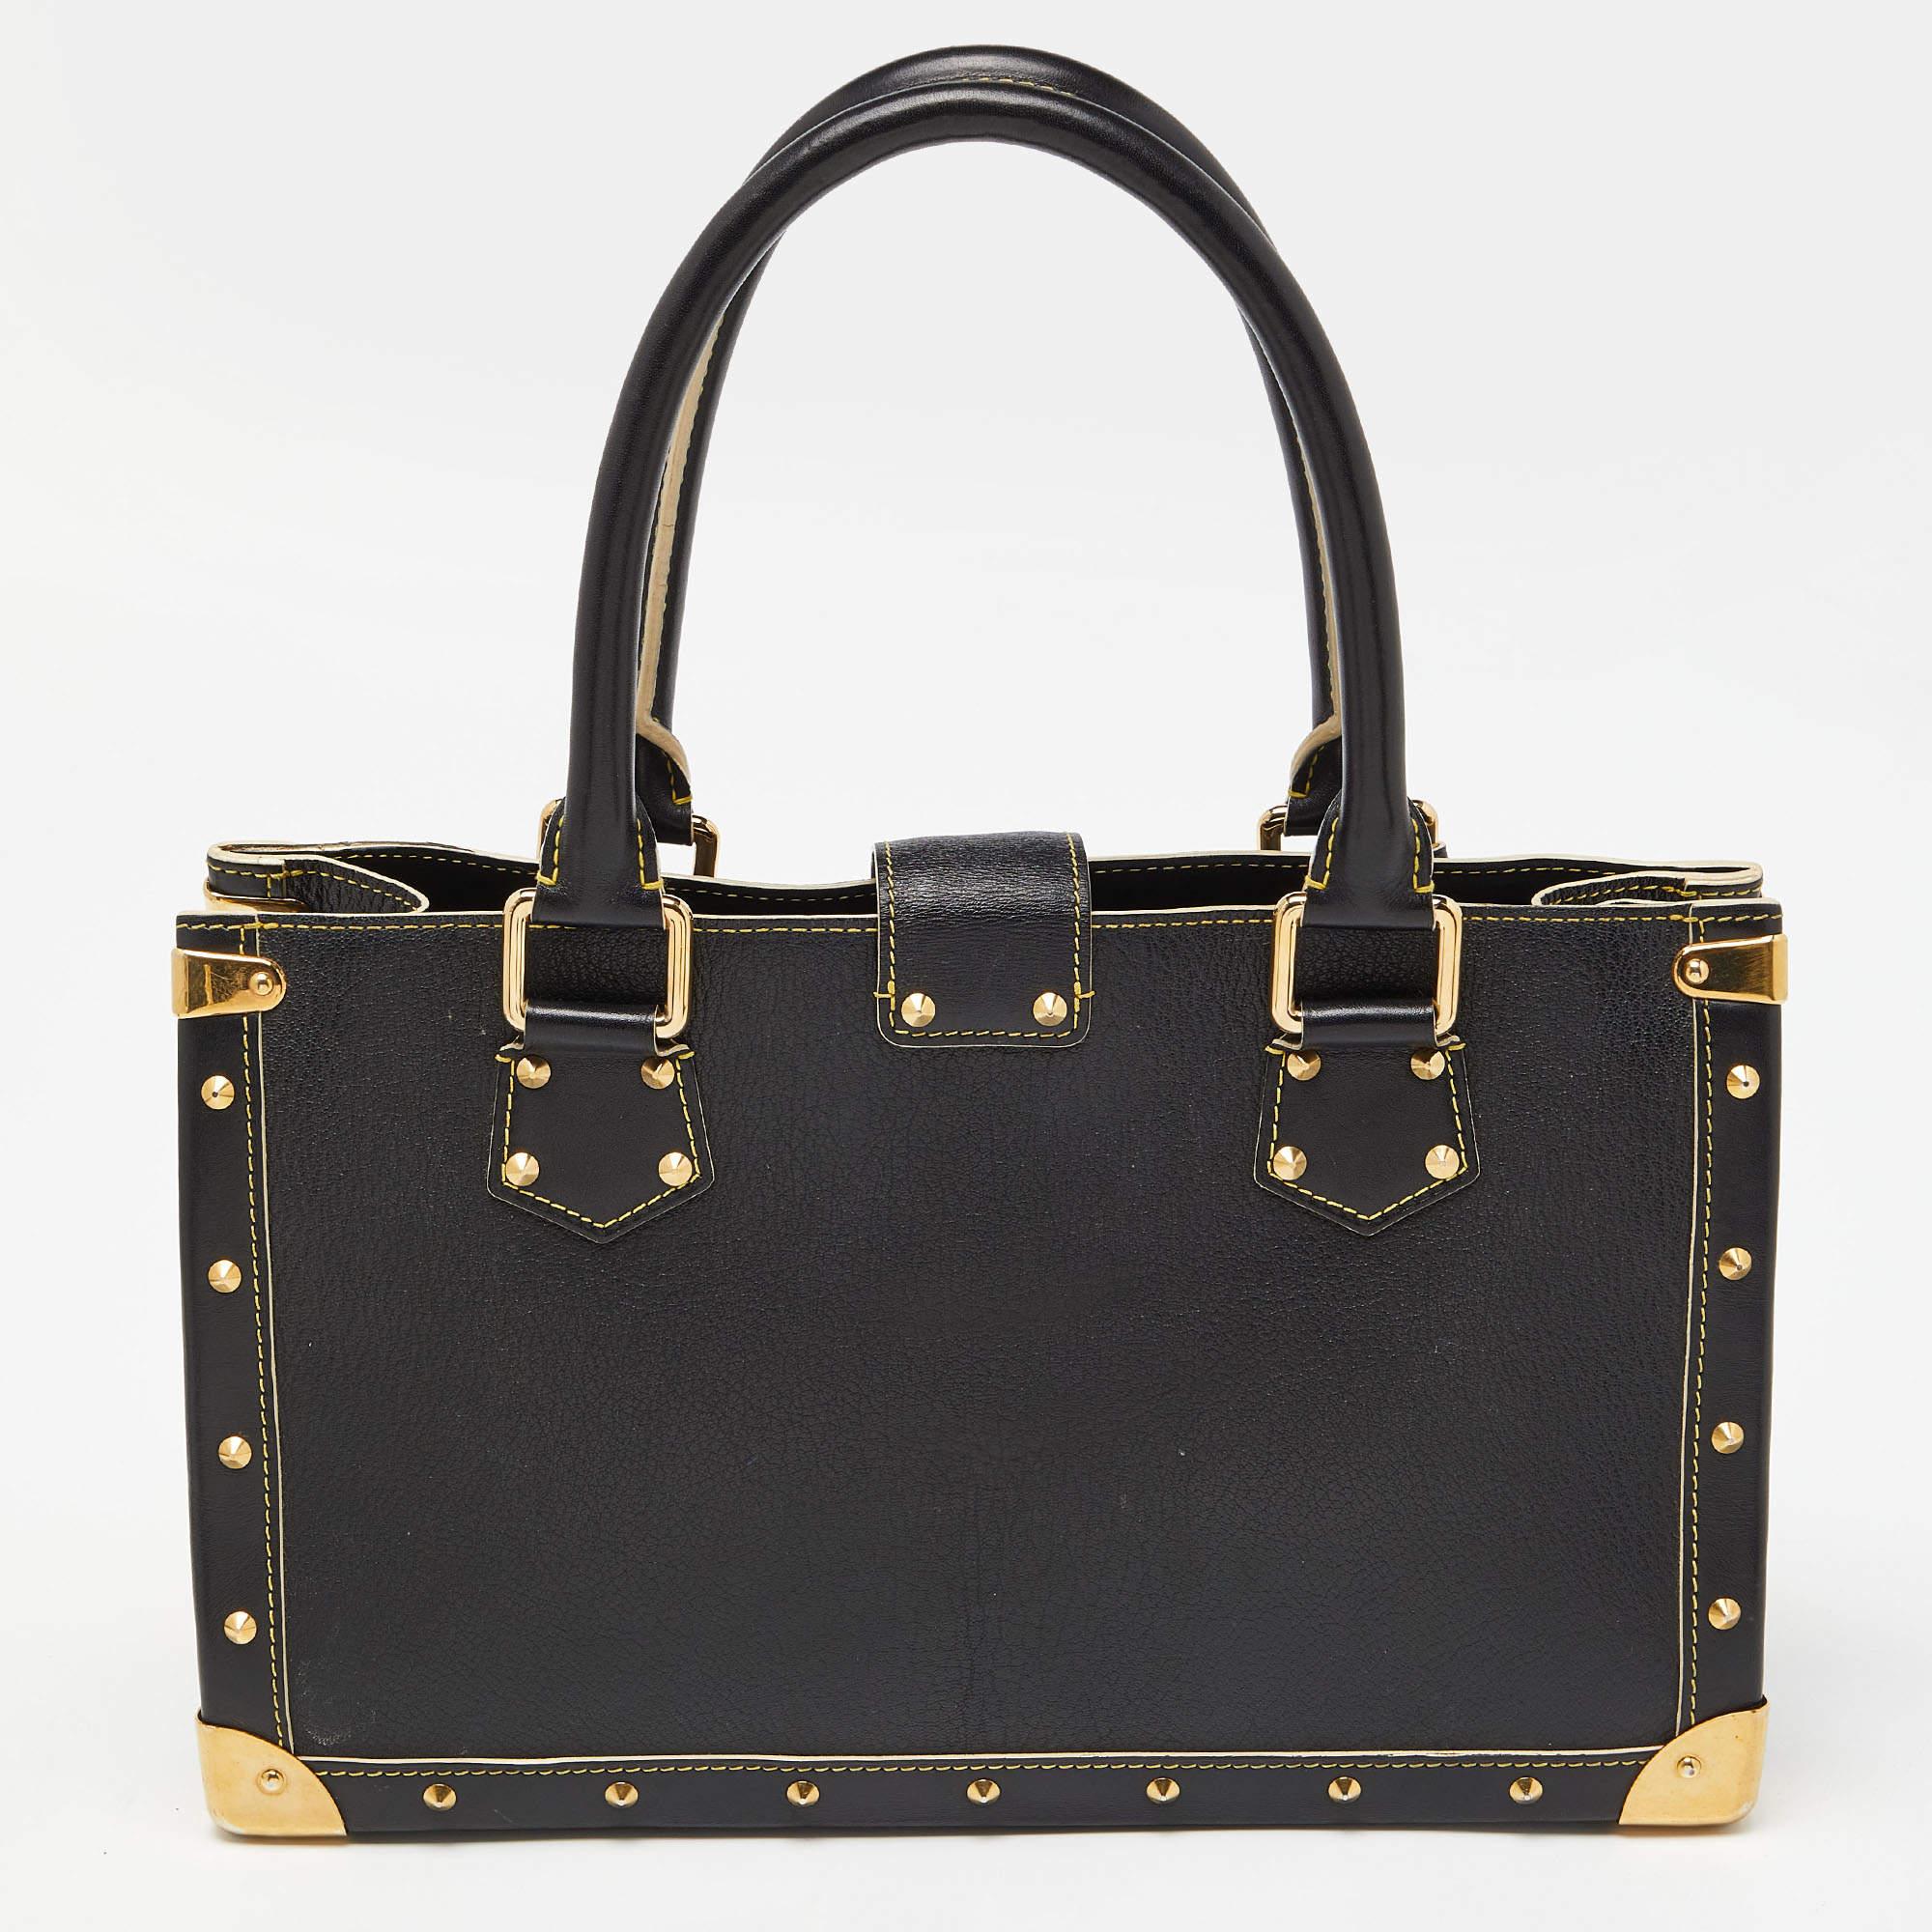 Louis Vuitton's Le Fabuleux bag looks nothing like a regular Louis Vuitton bag! Rectangular in shape, the bag is crafted from black Suhali leather and has stud embellishments. It features dual top handles, a front zip pocket, and the S lock